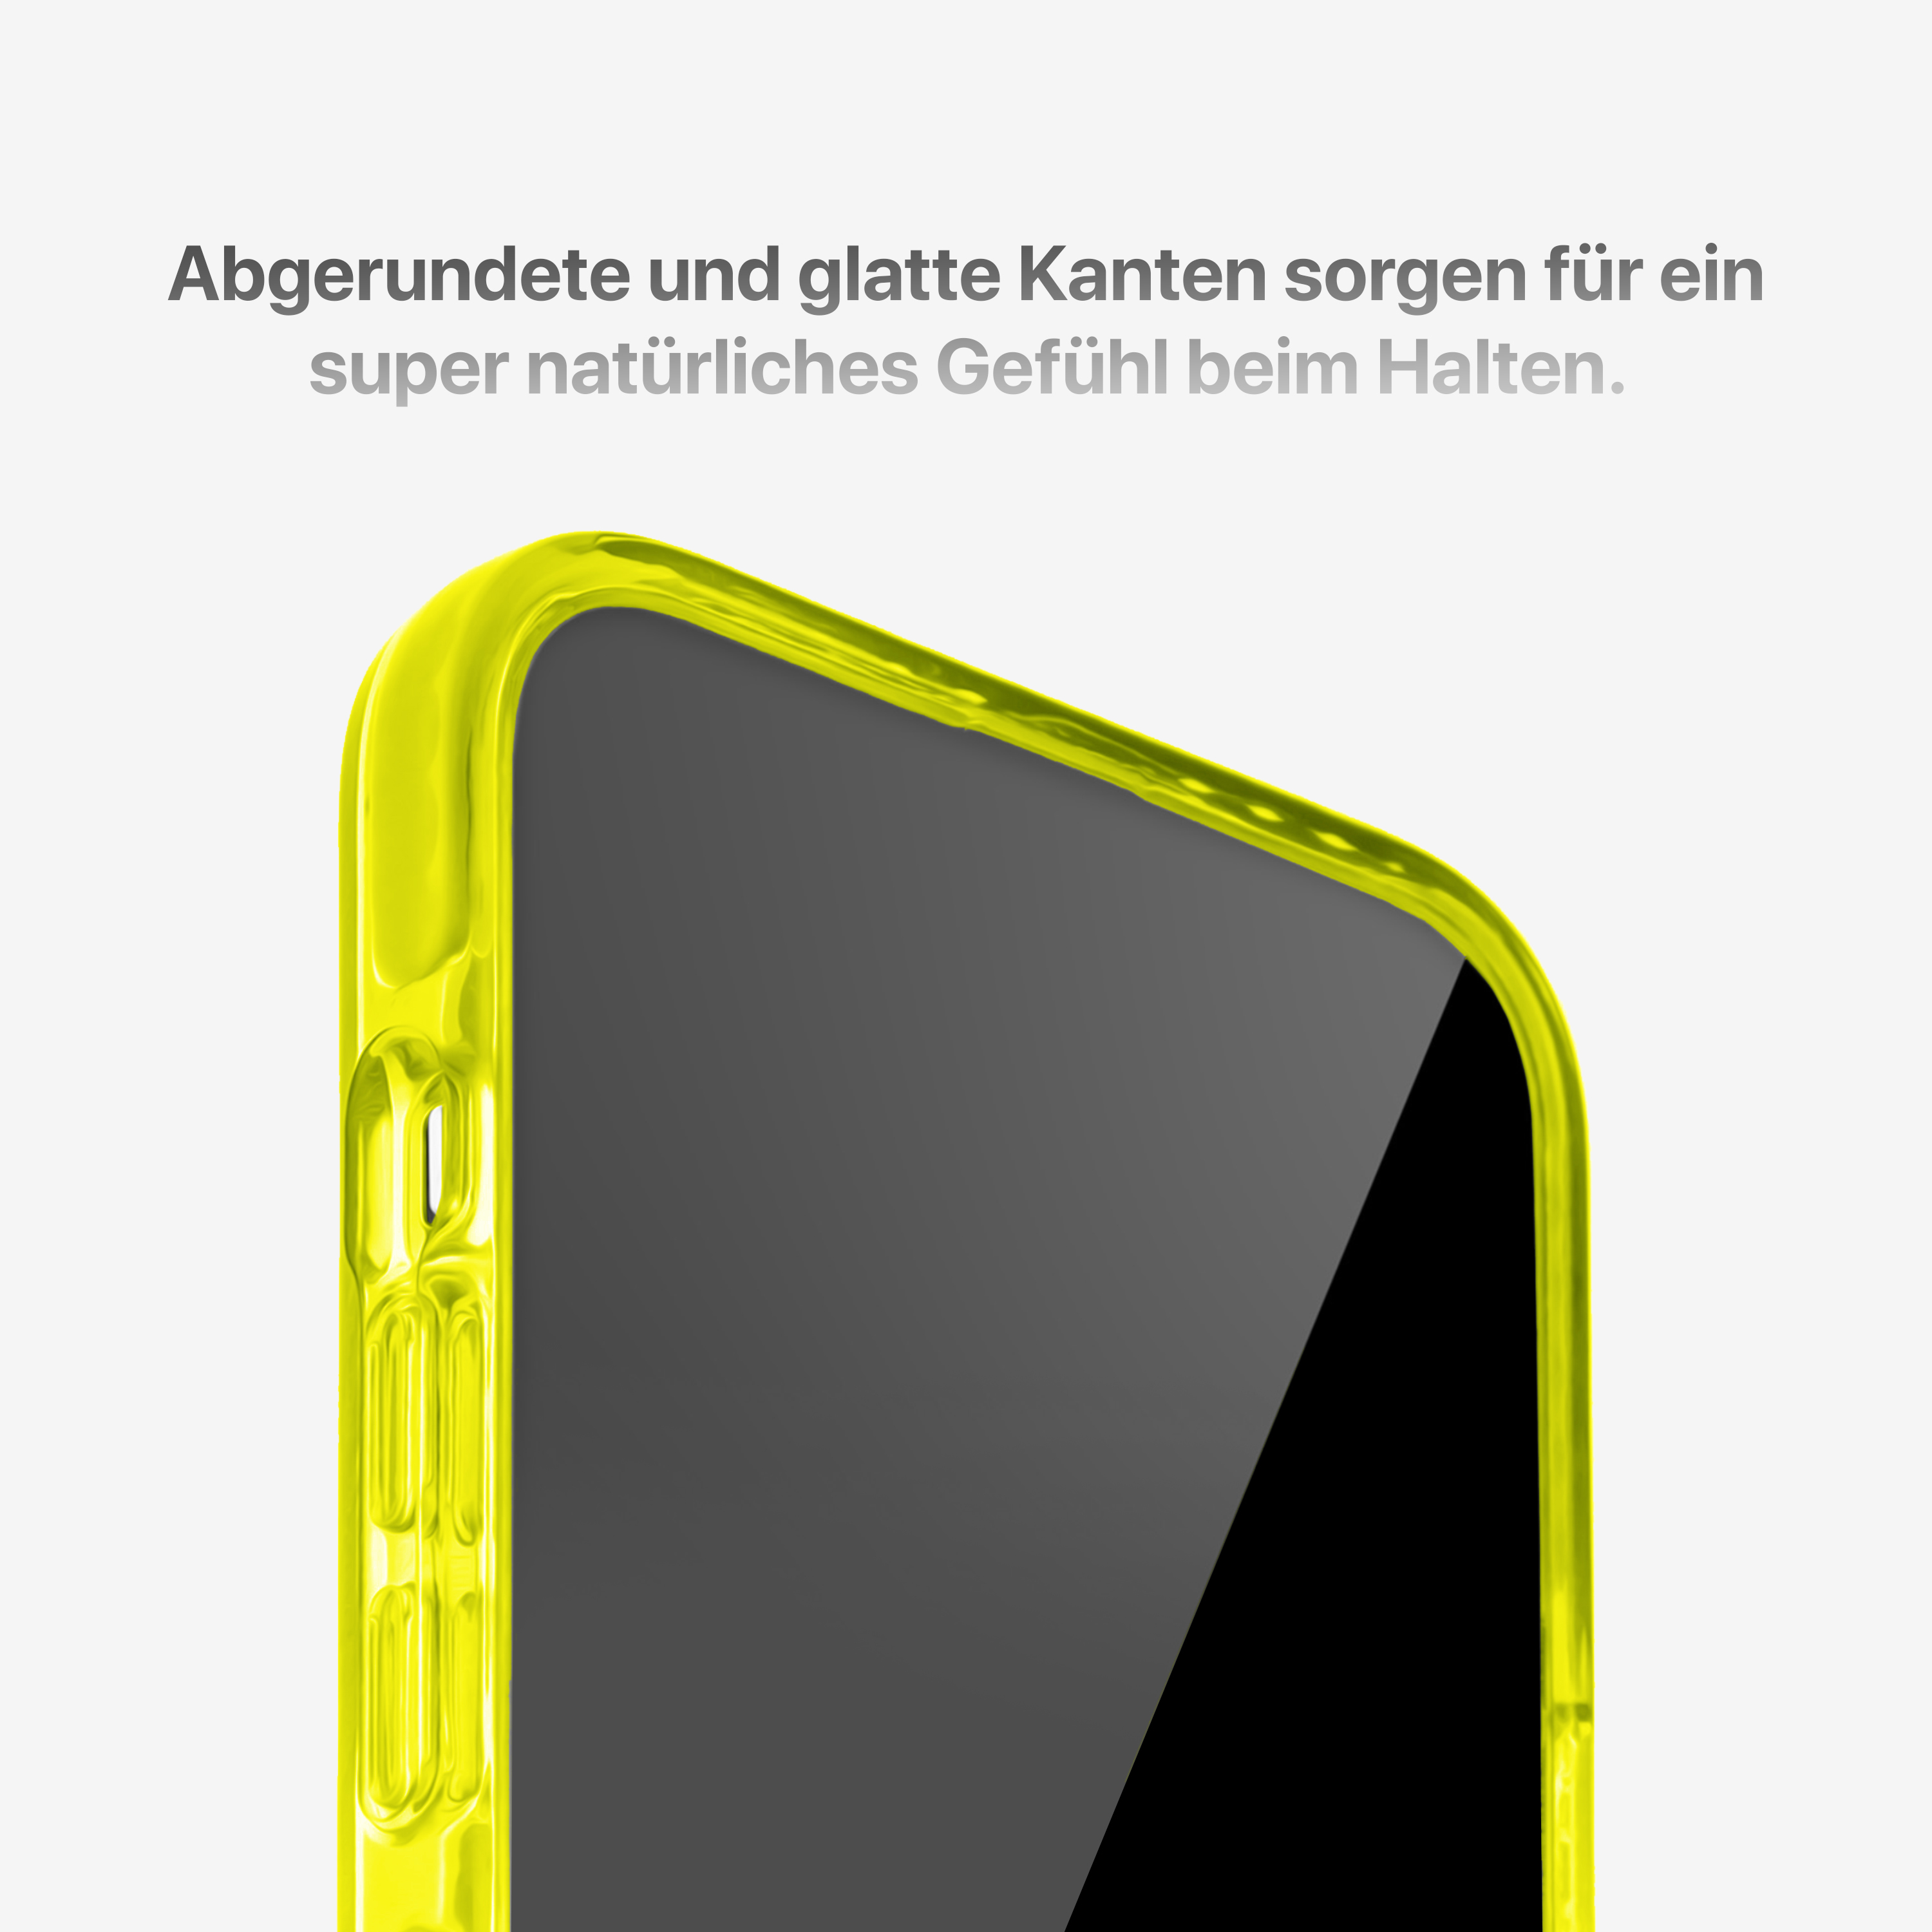 Cybercase, Apple, iPhone Cyberyellow 14 Backcover, MODEL Max, ROLE Pro